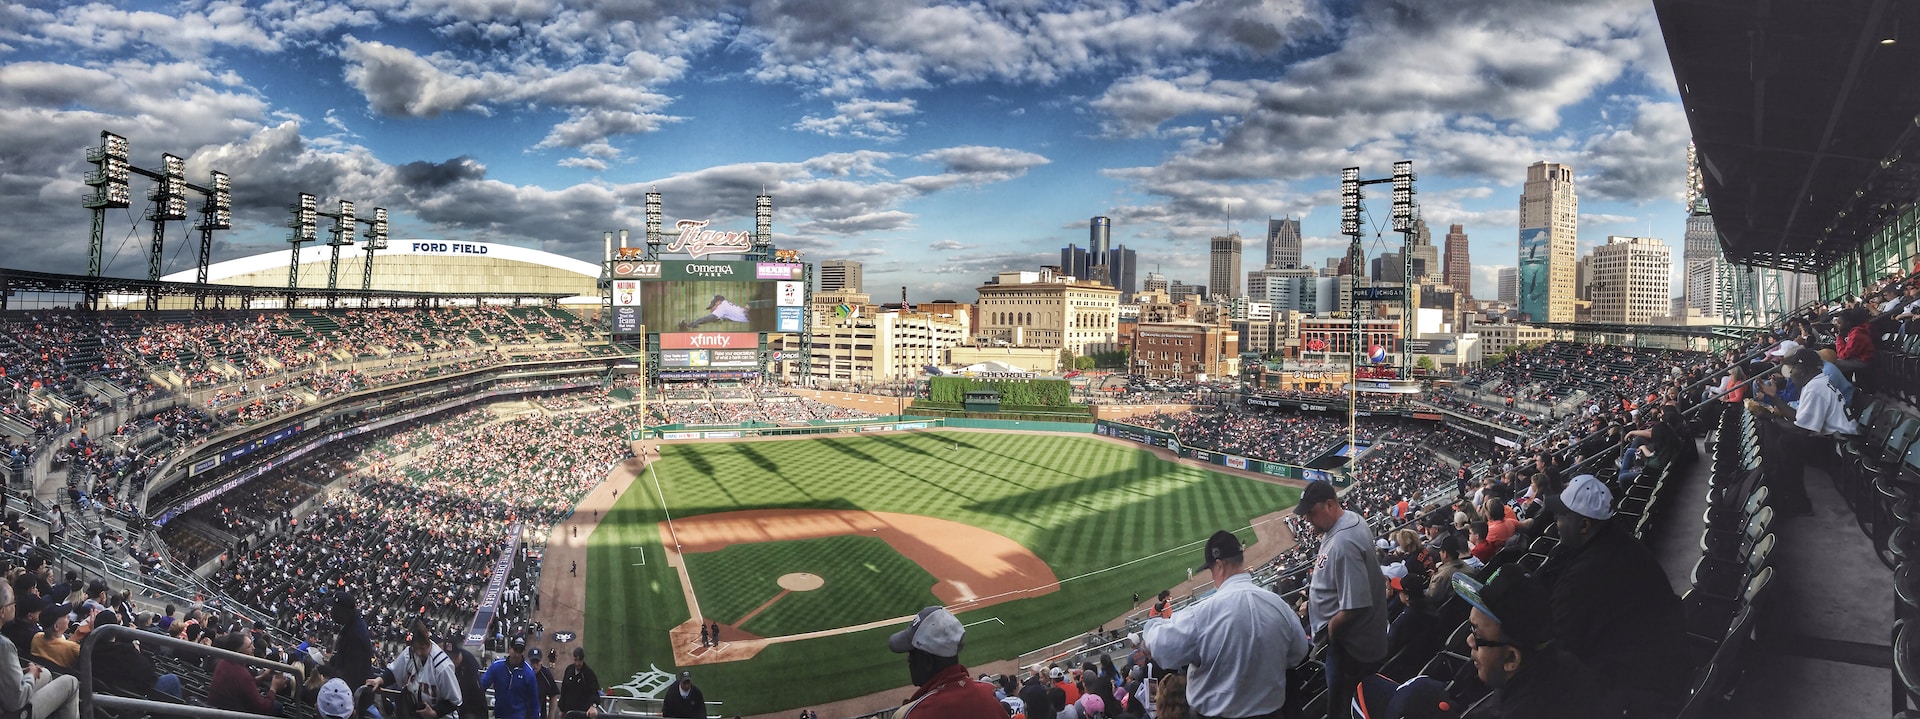 Photograph of Comerica Park, home of the Detroit Tigers, looking over the diamond from the upper deck.